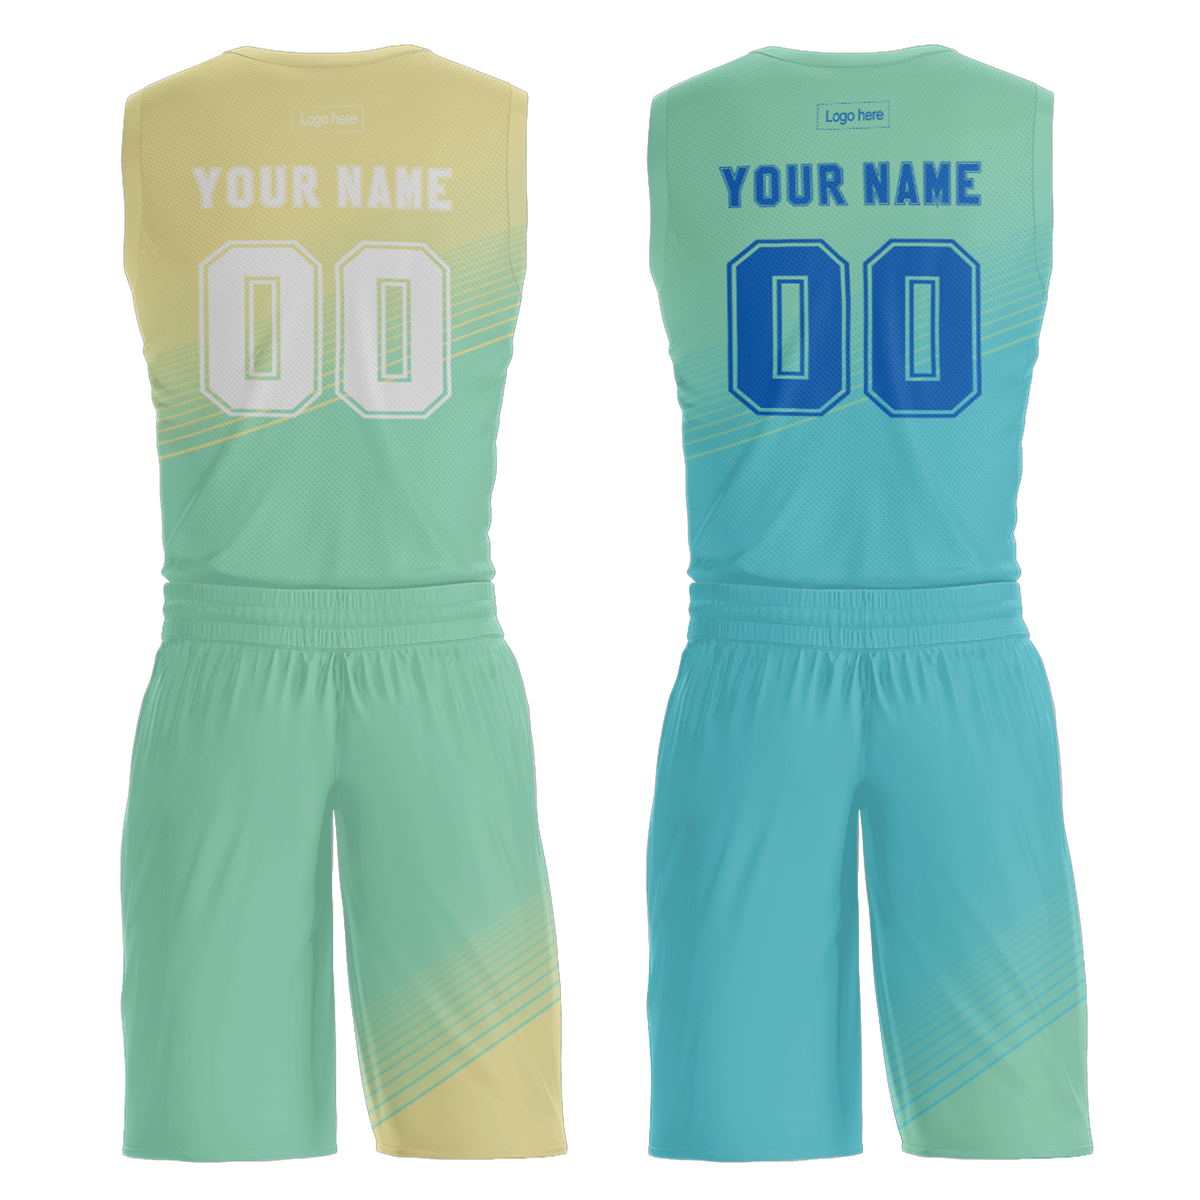 Custom Sublimated Breathable Collage Basketball Shirts Full Printed Men's Reversible Blank Basketball Jersey Uniform Clothes